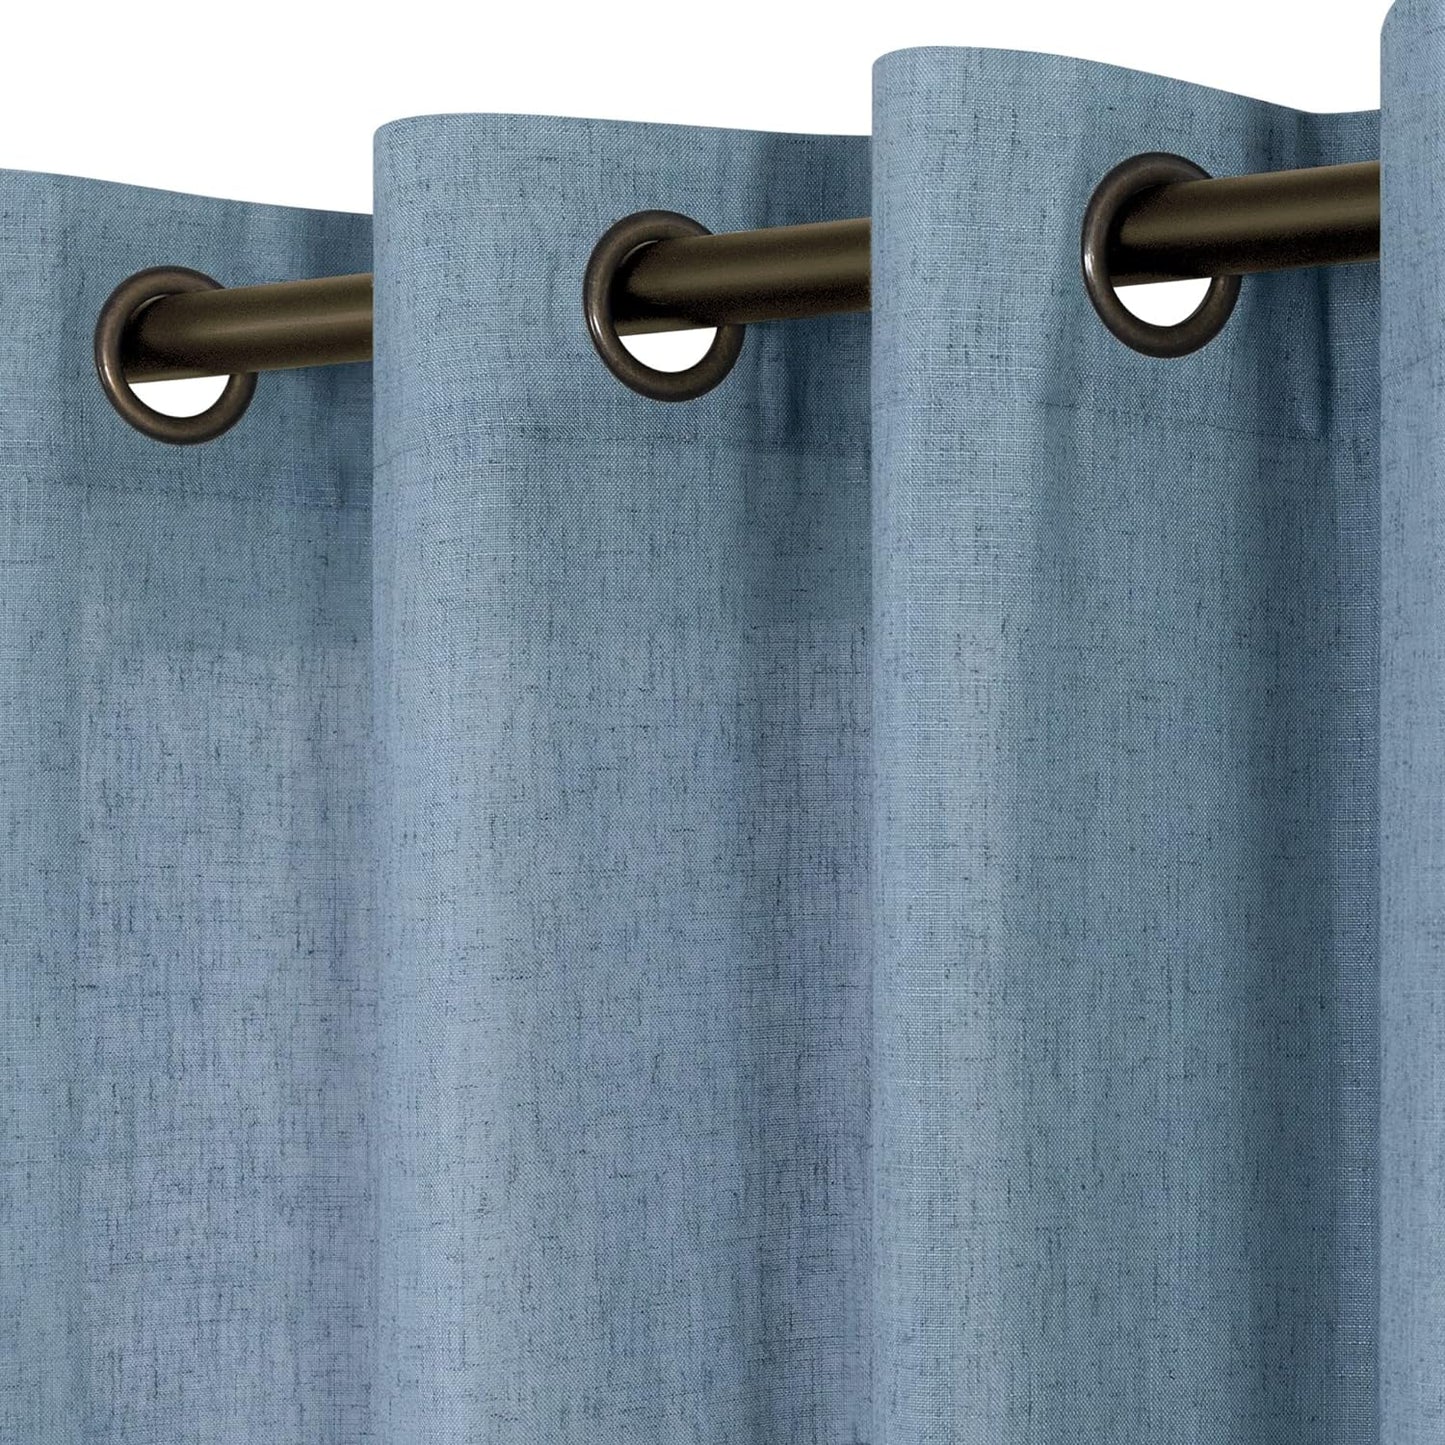 KOUFALL Beige Rustic Country Curtains for Living Room 84 Inches Long Flax Linen Bronze Grommet Tan Sand Color Solid Faux Linen Curtains for Bedroom Sliding Glass Patio Door 2 Panels  KOUFALL TEXTILE Stone Blue 52X108 